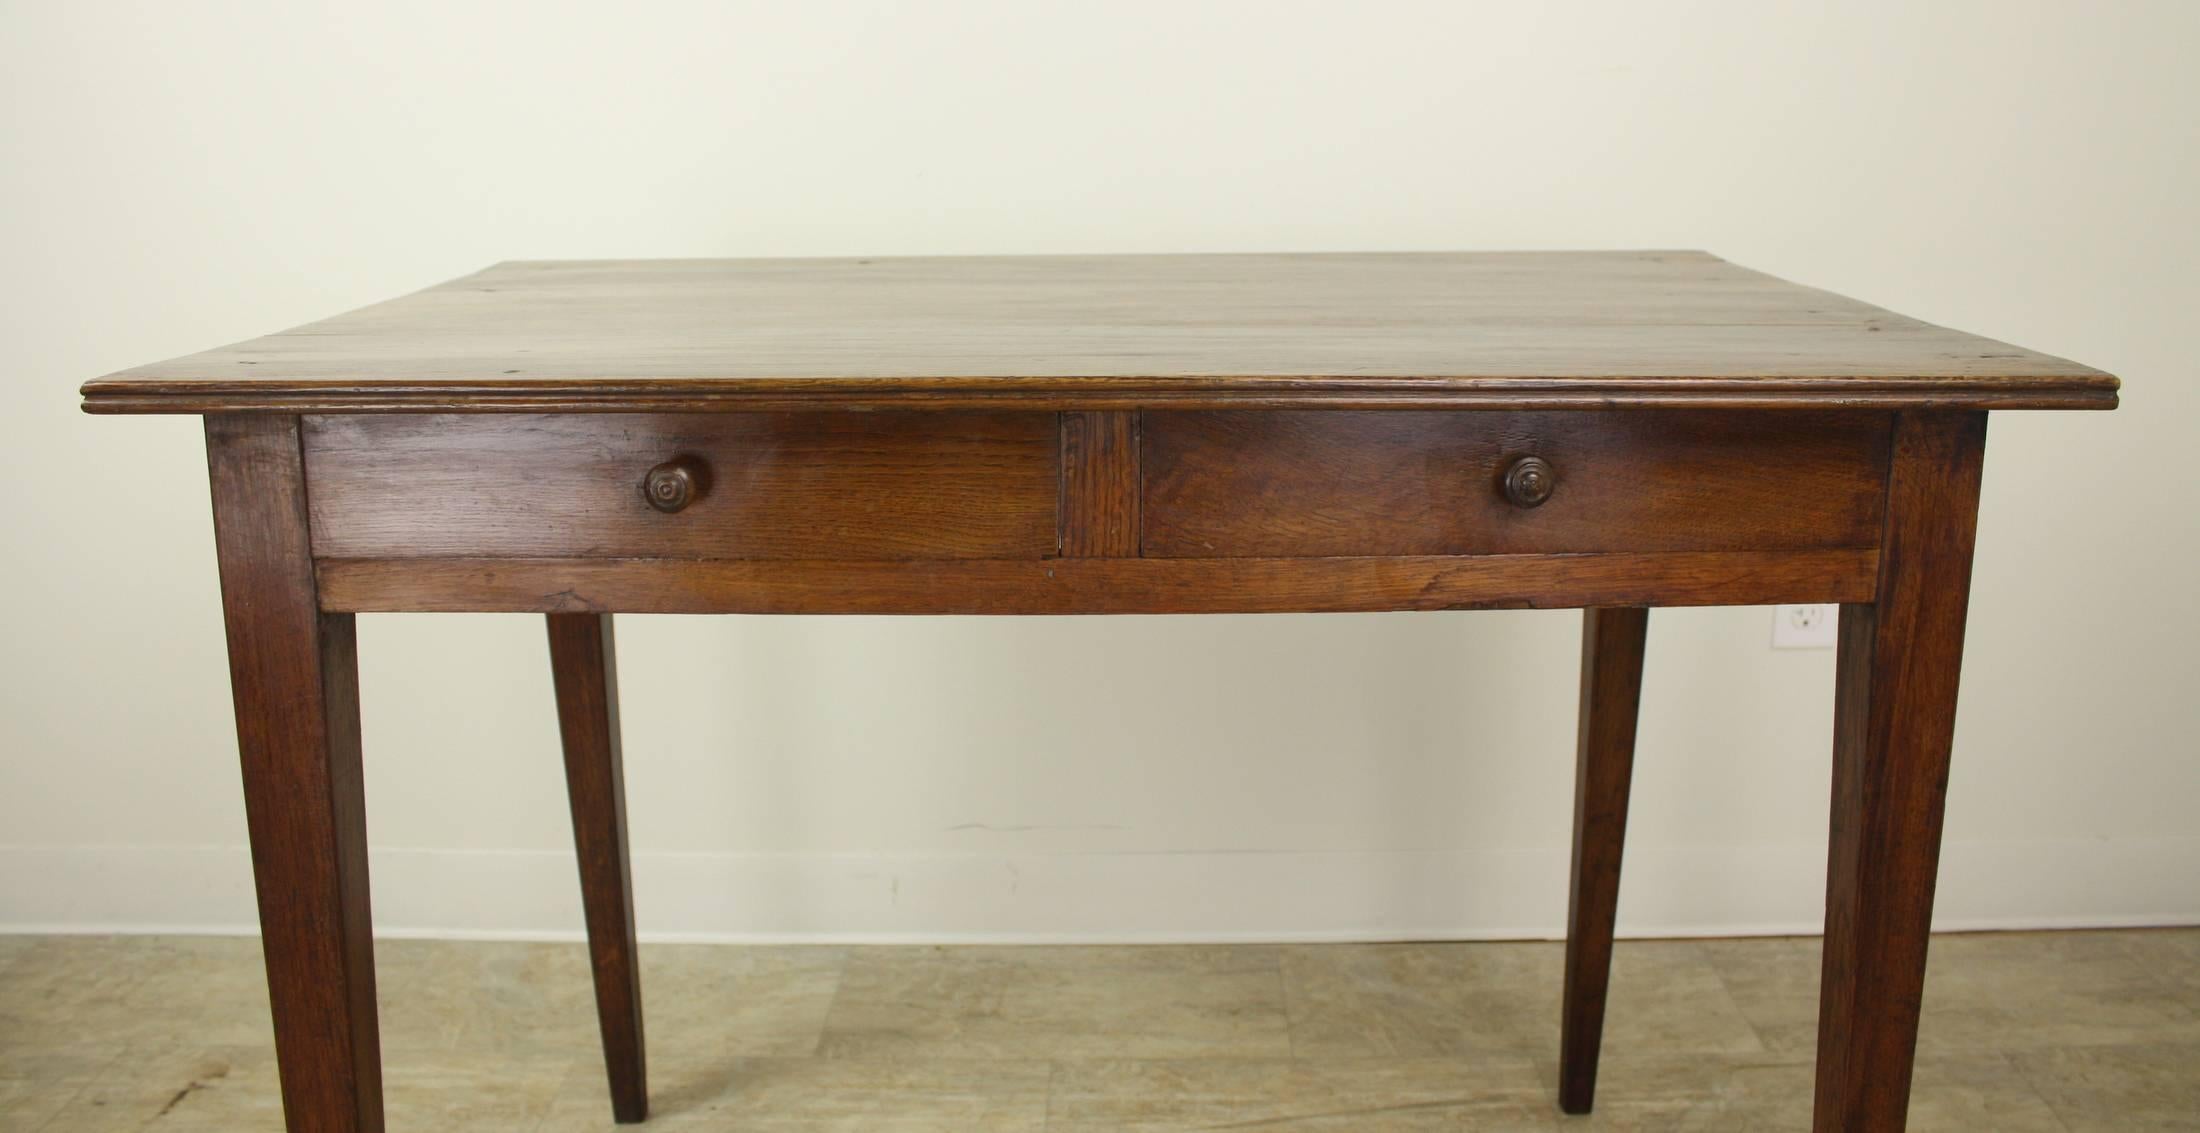 A charming French writing table or small desk in mellow oak. Two small drawers in front add a sweet detail, and the apron height of 25.5" is good for knees. Slender elegant legs and wooden knobs. Perfect!